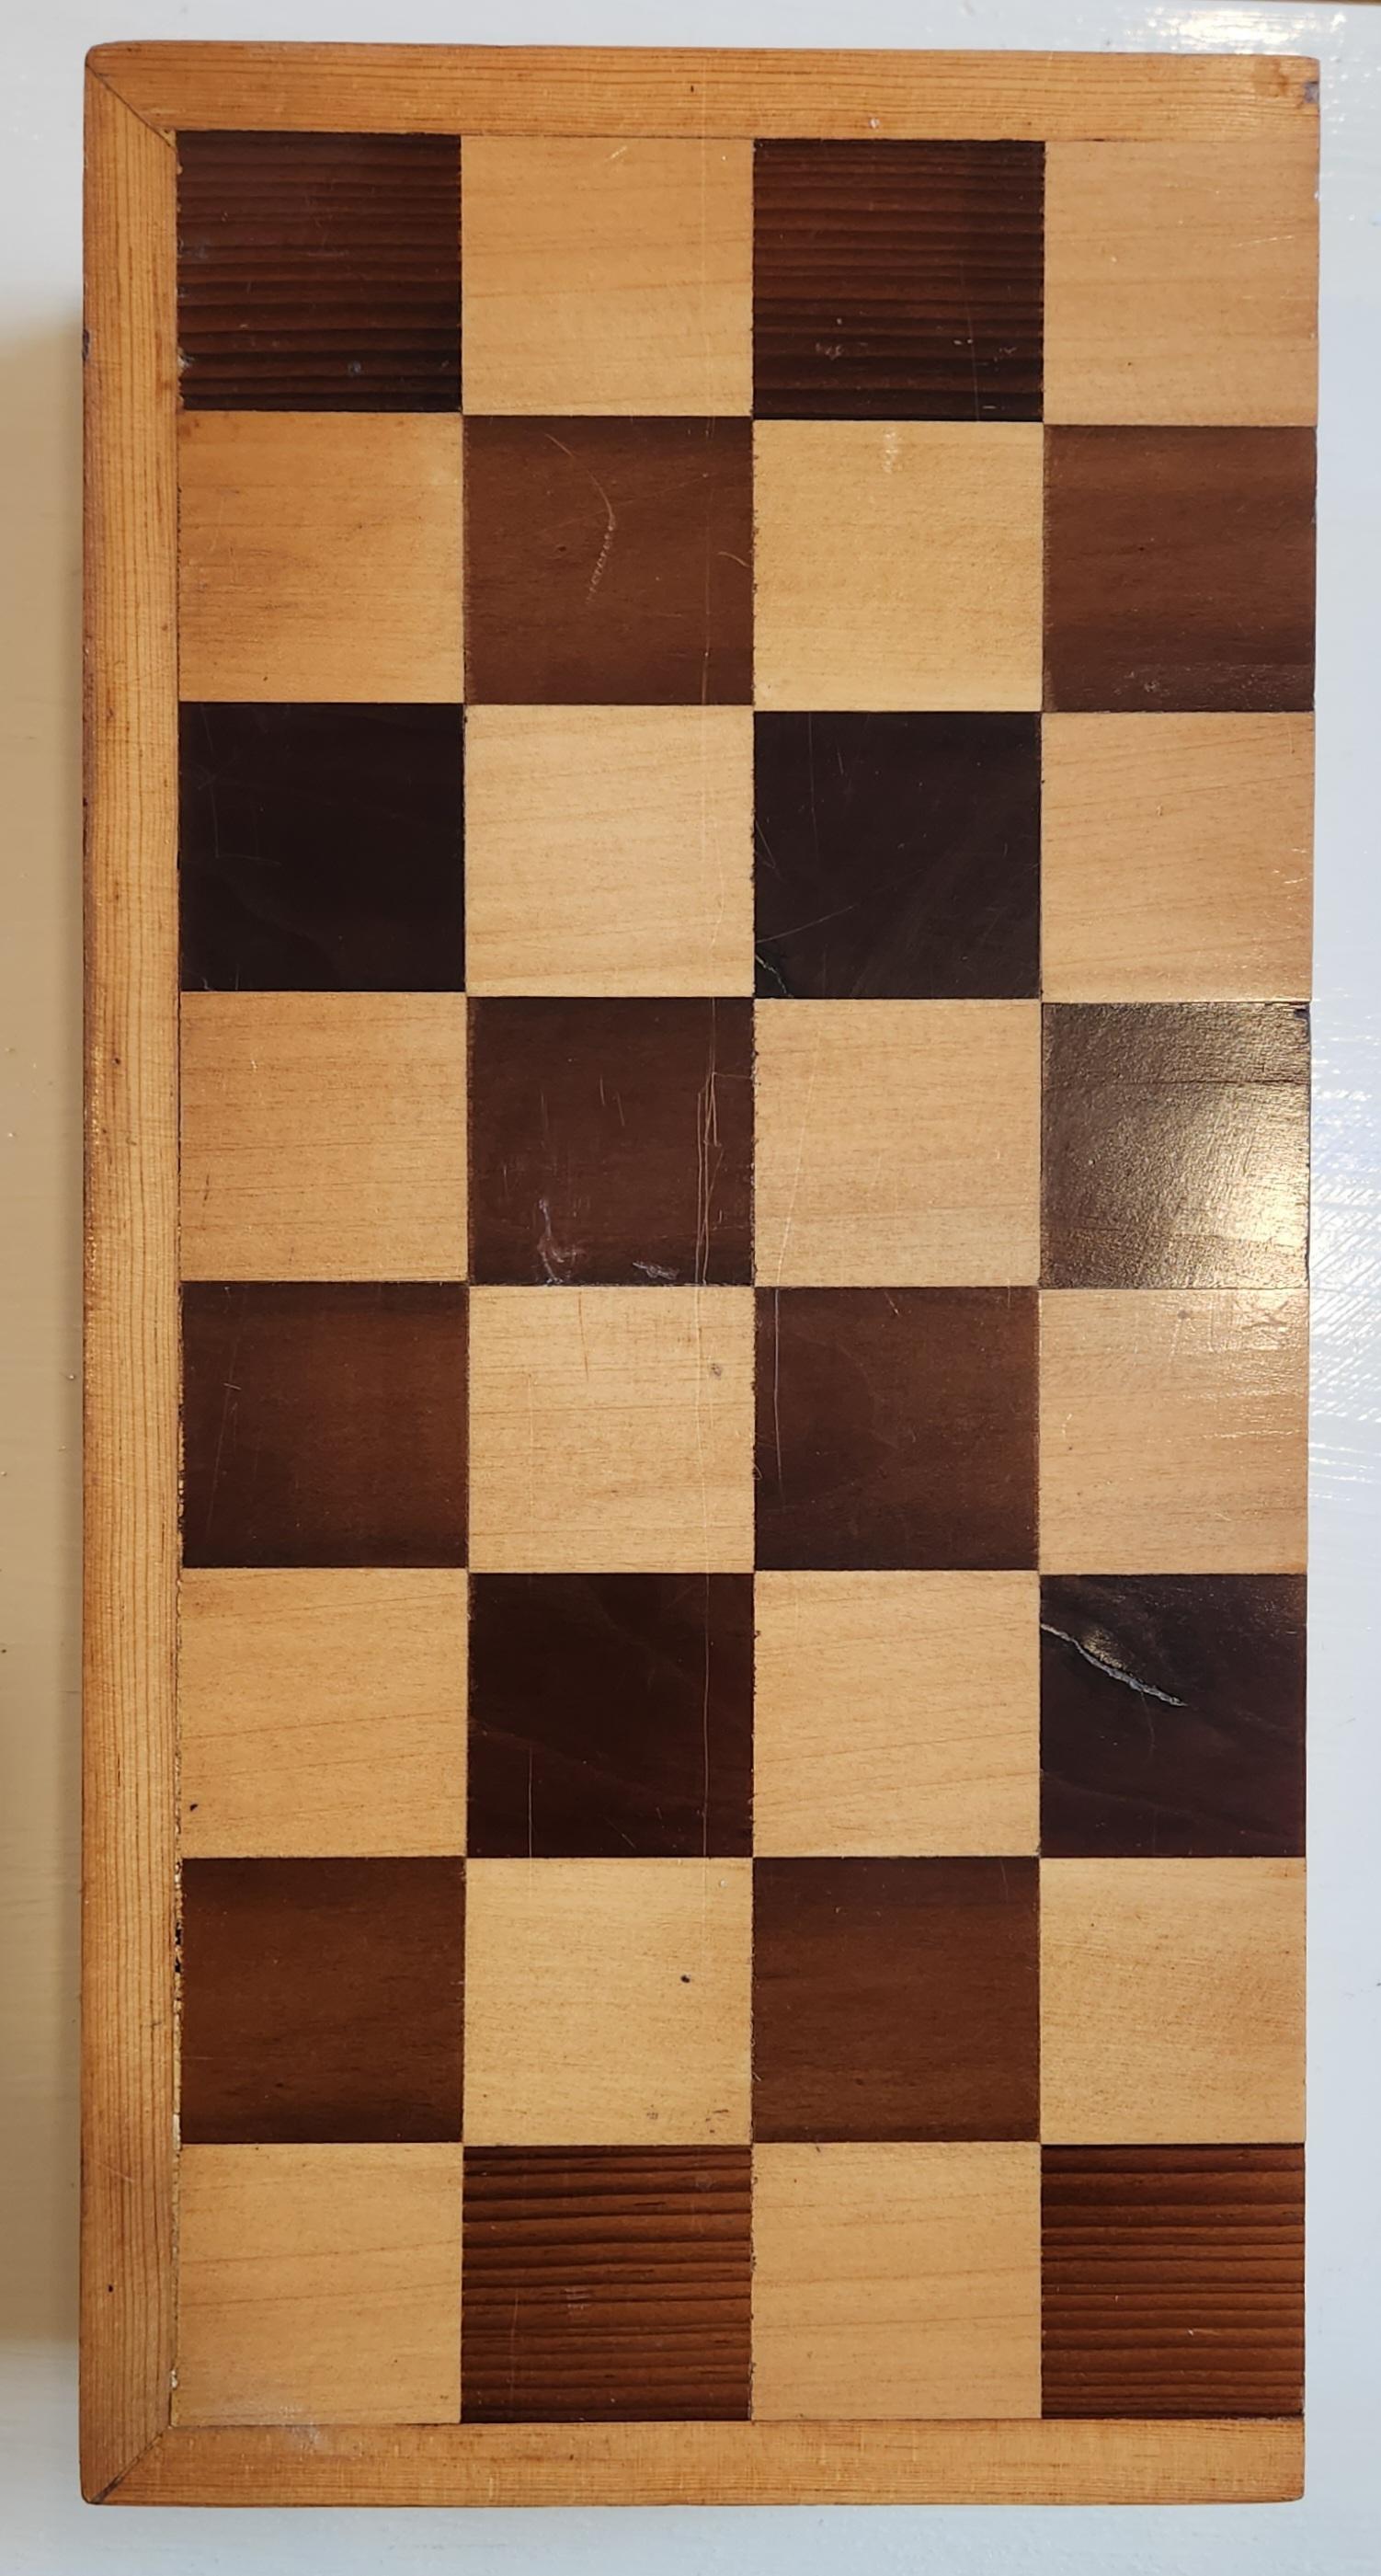 Hand Carved Wooden Chess Set - Modern Art by Unknown